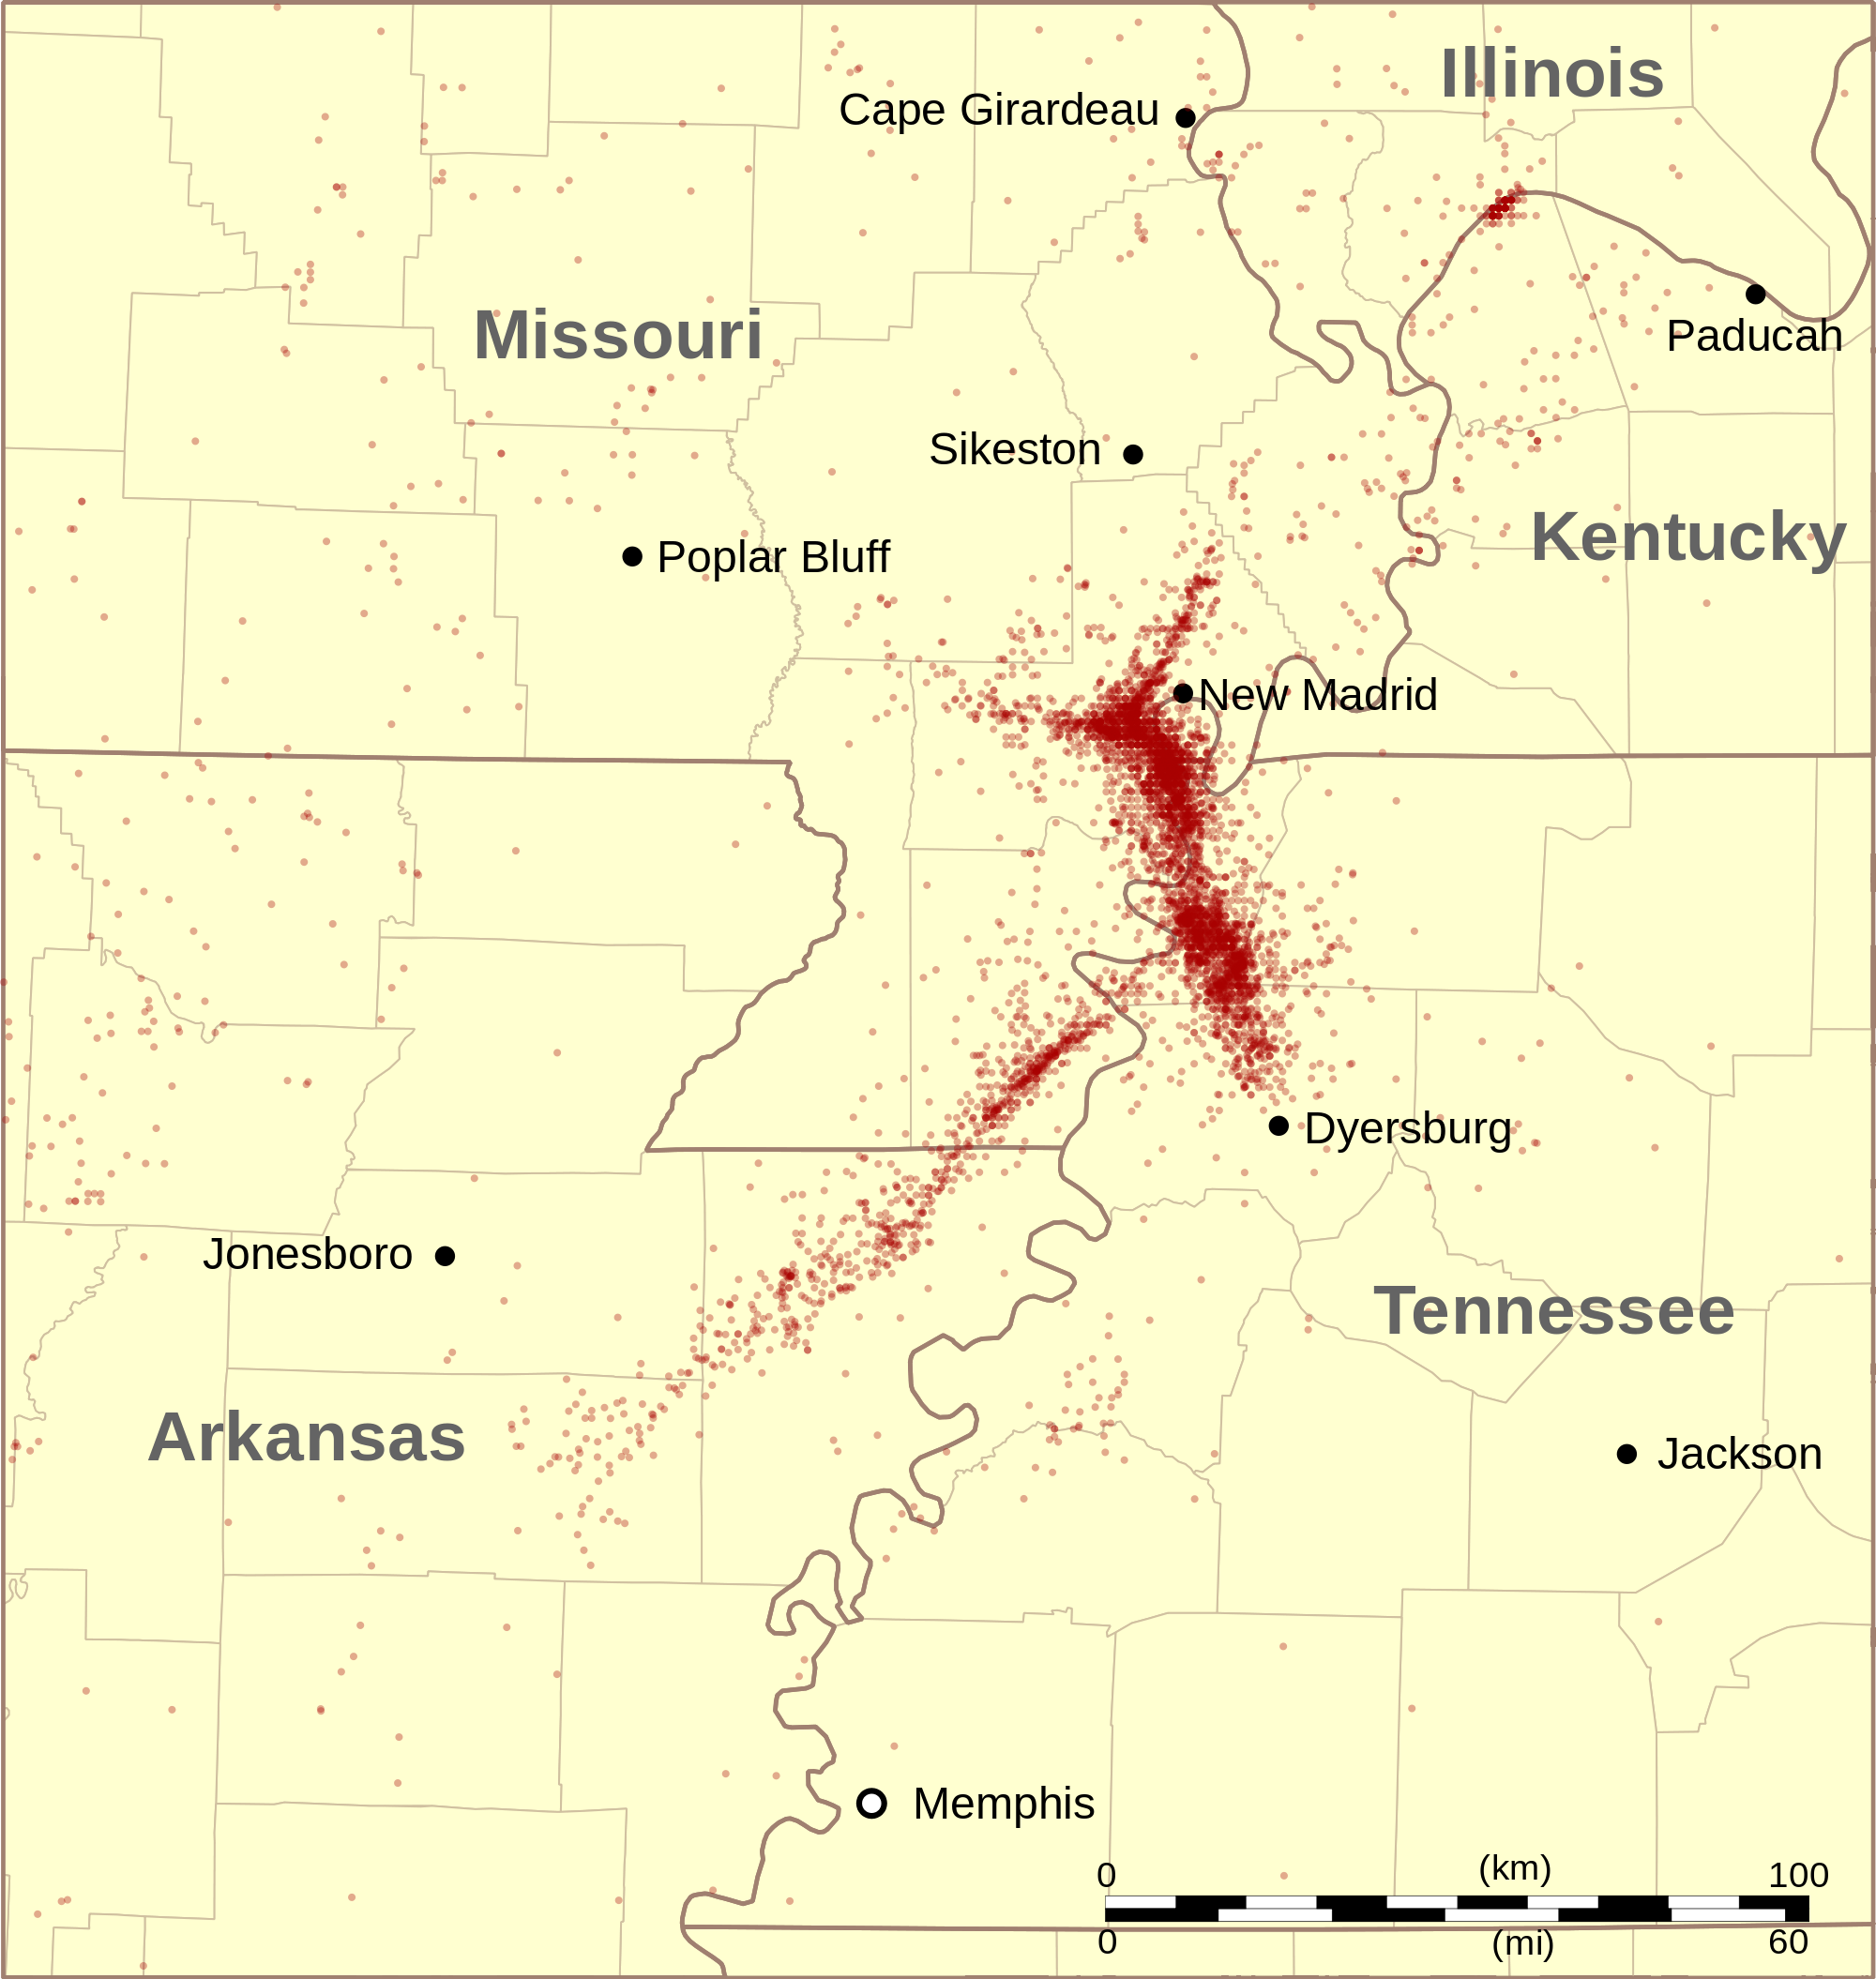 New Madrid Fault Zone